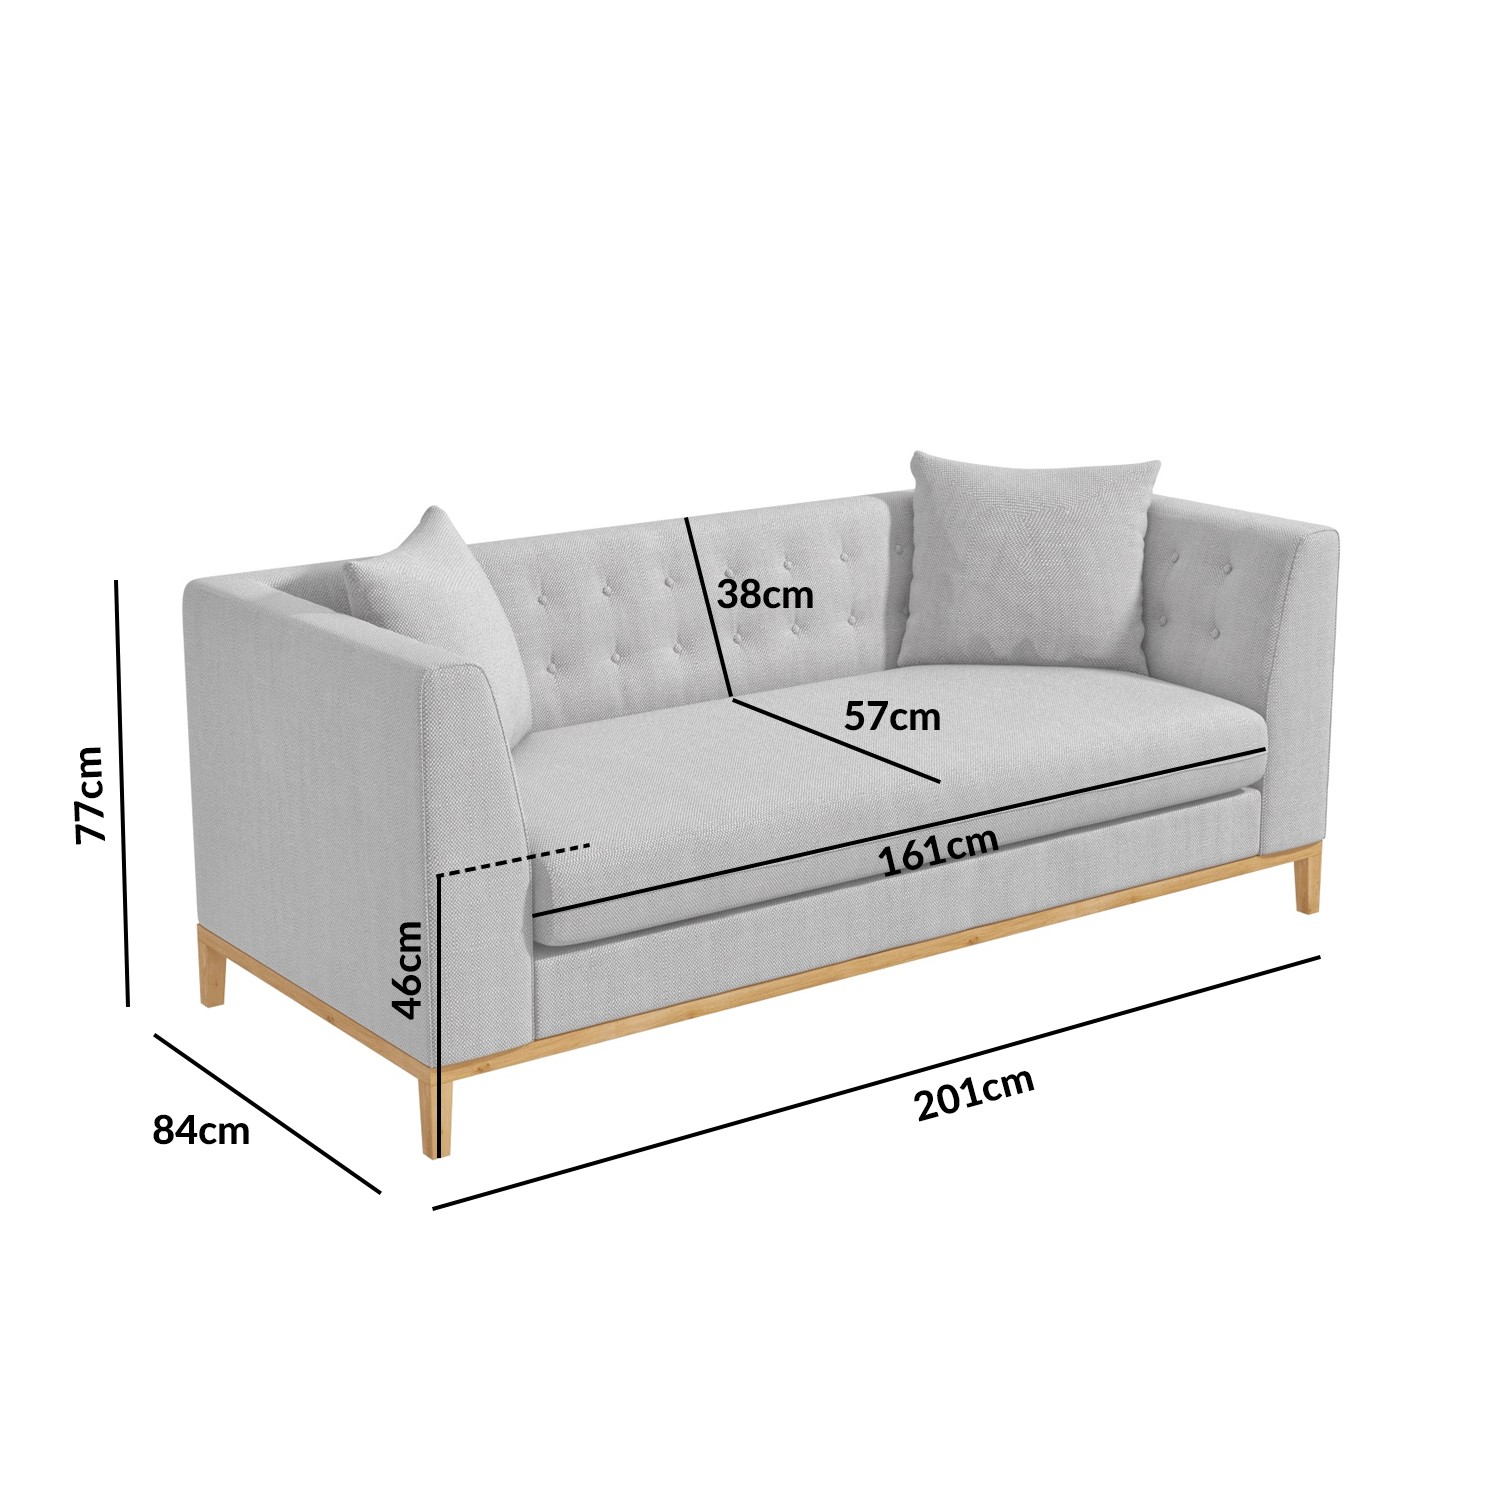 Erin Light Grey Fabric 3 Seater Sofa, What Is The Length Of A 3 Seater Sofa